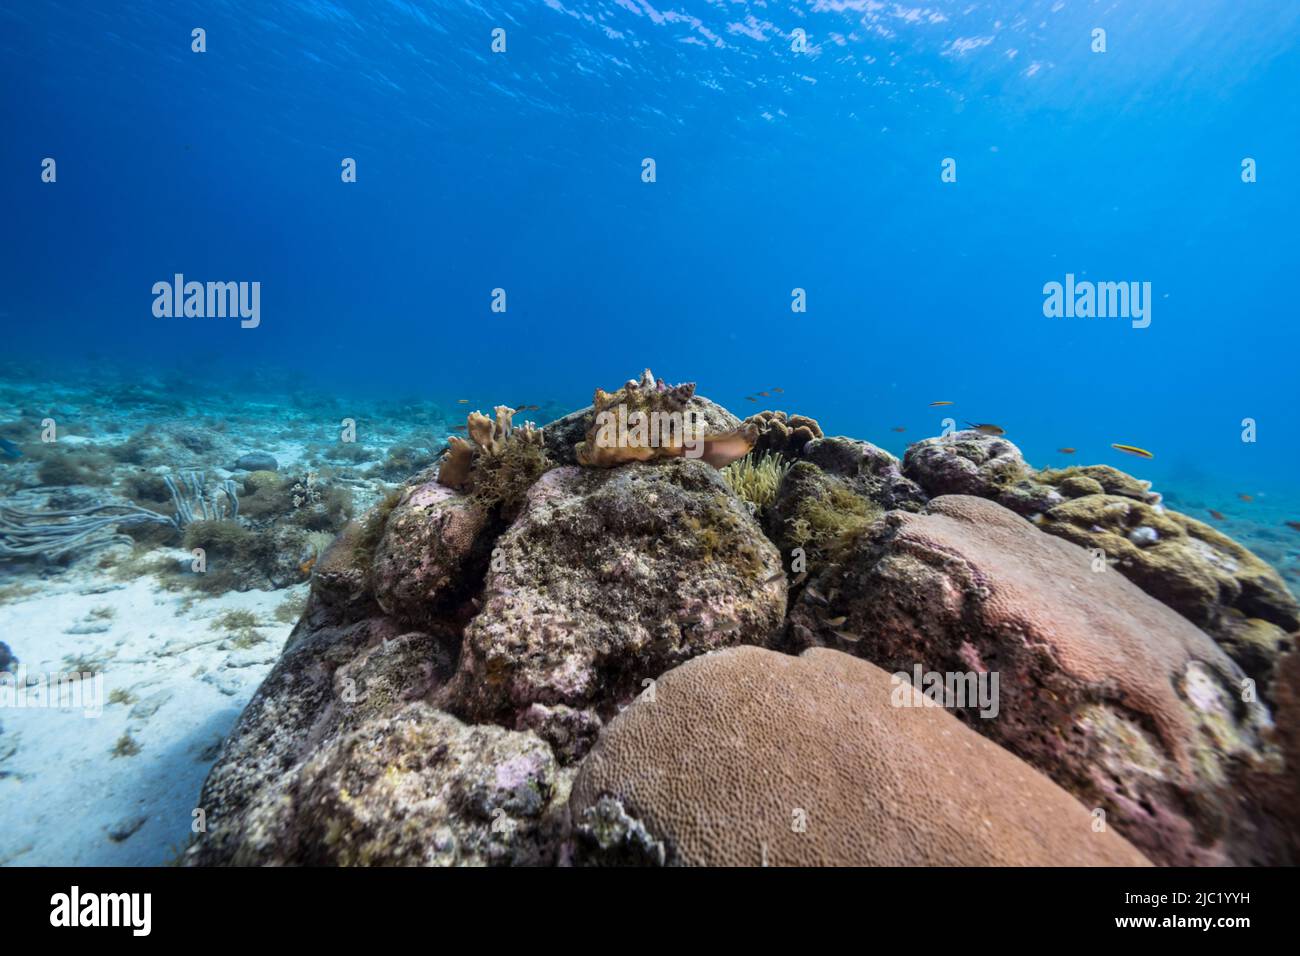 Seascape with Conch Shell, coral, and sponge in the coral reef of the Caribbean Sea, Curacao Stock Photo